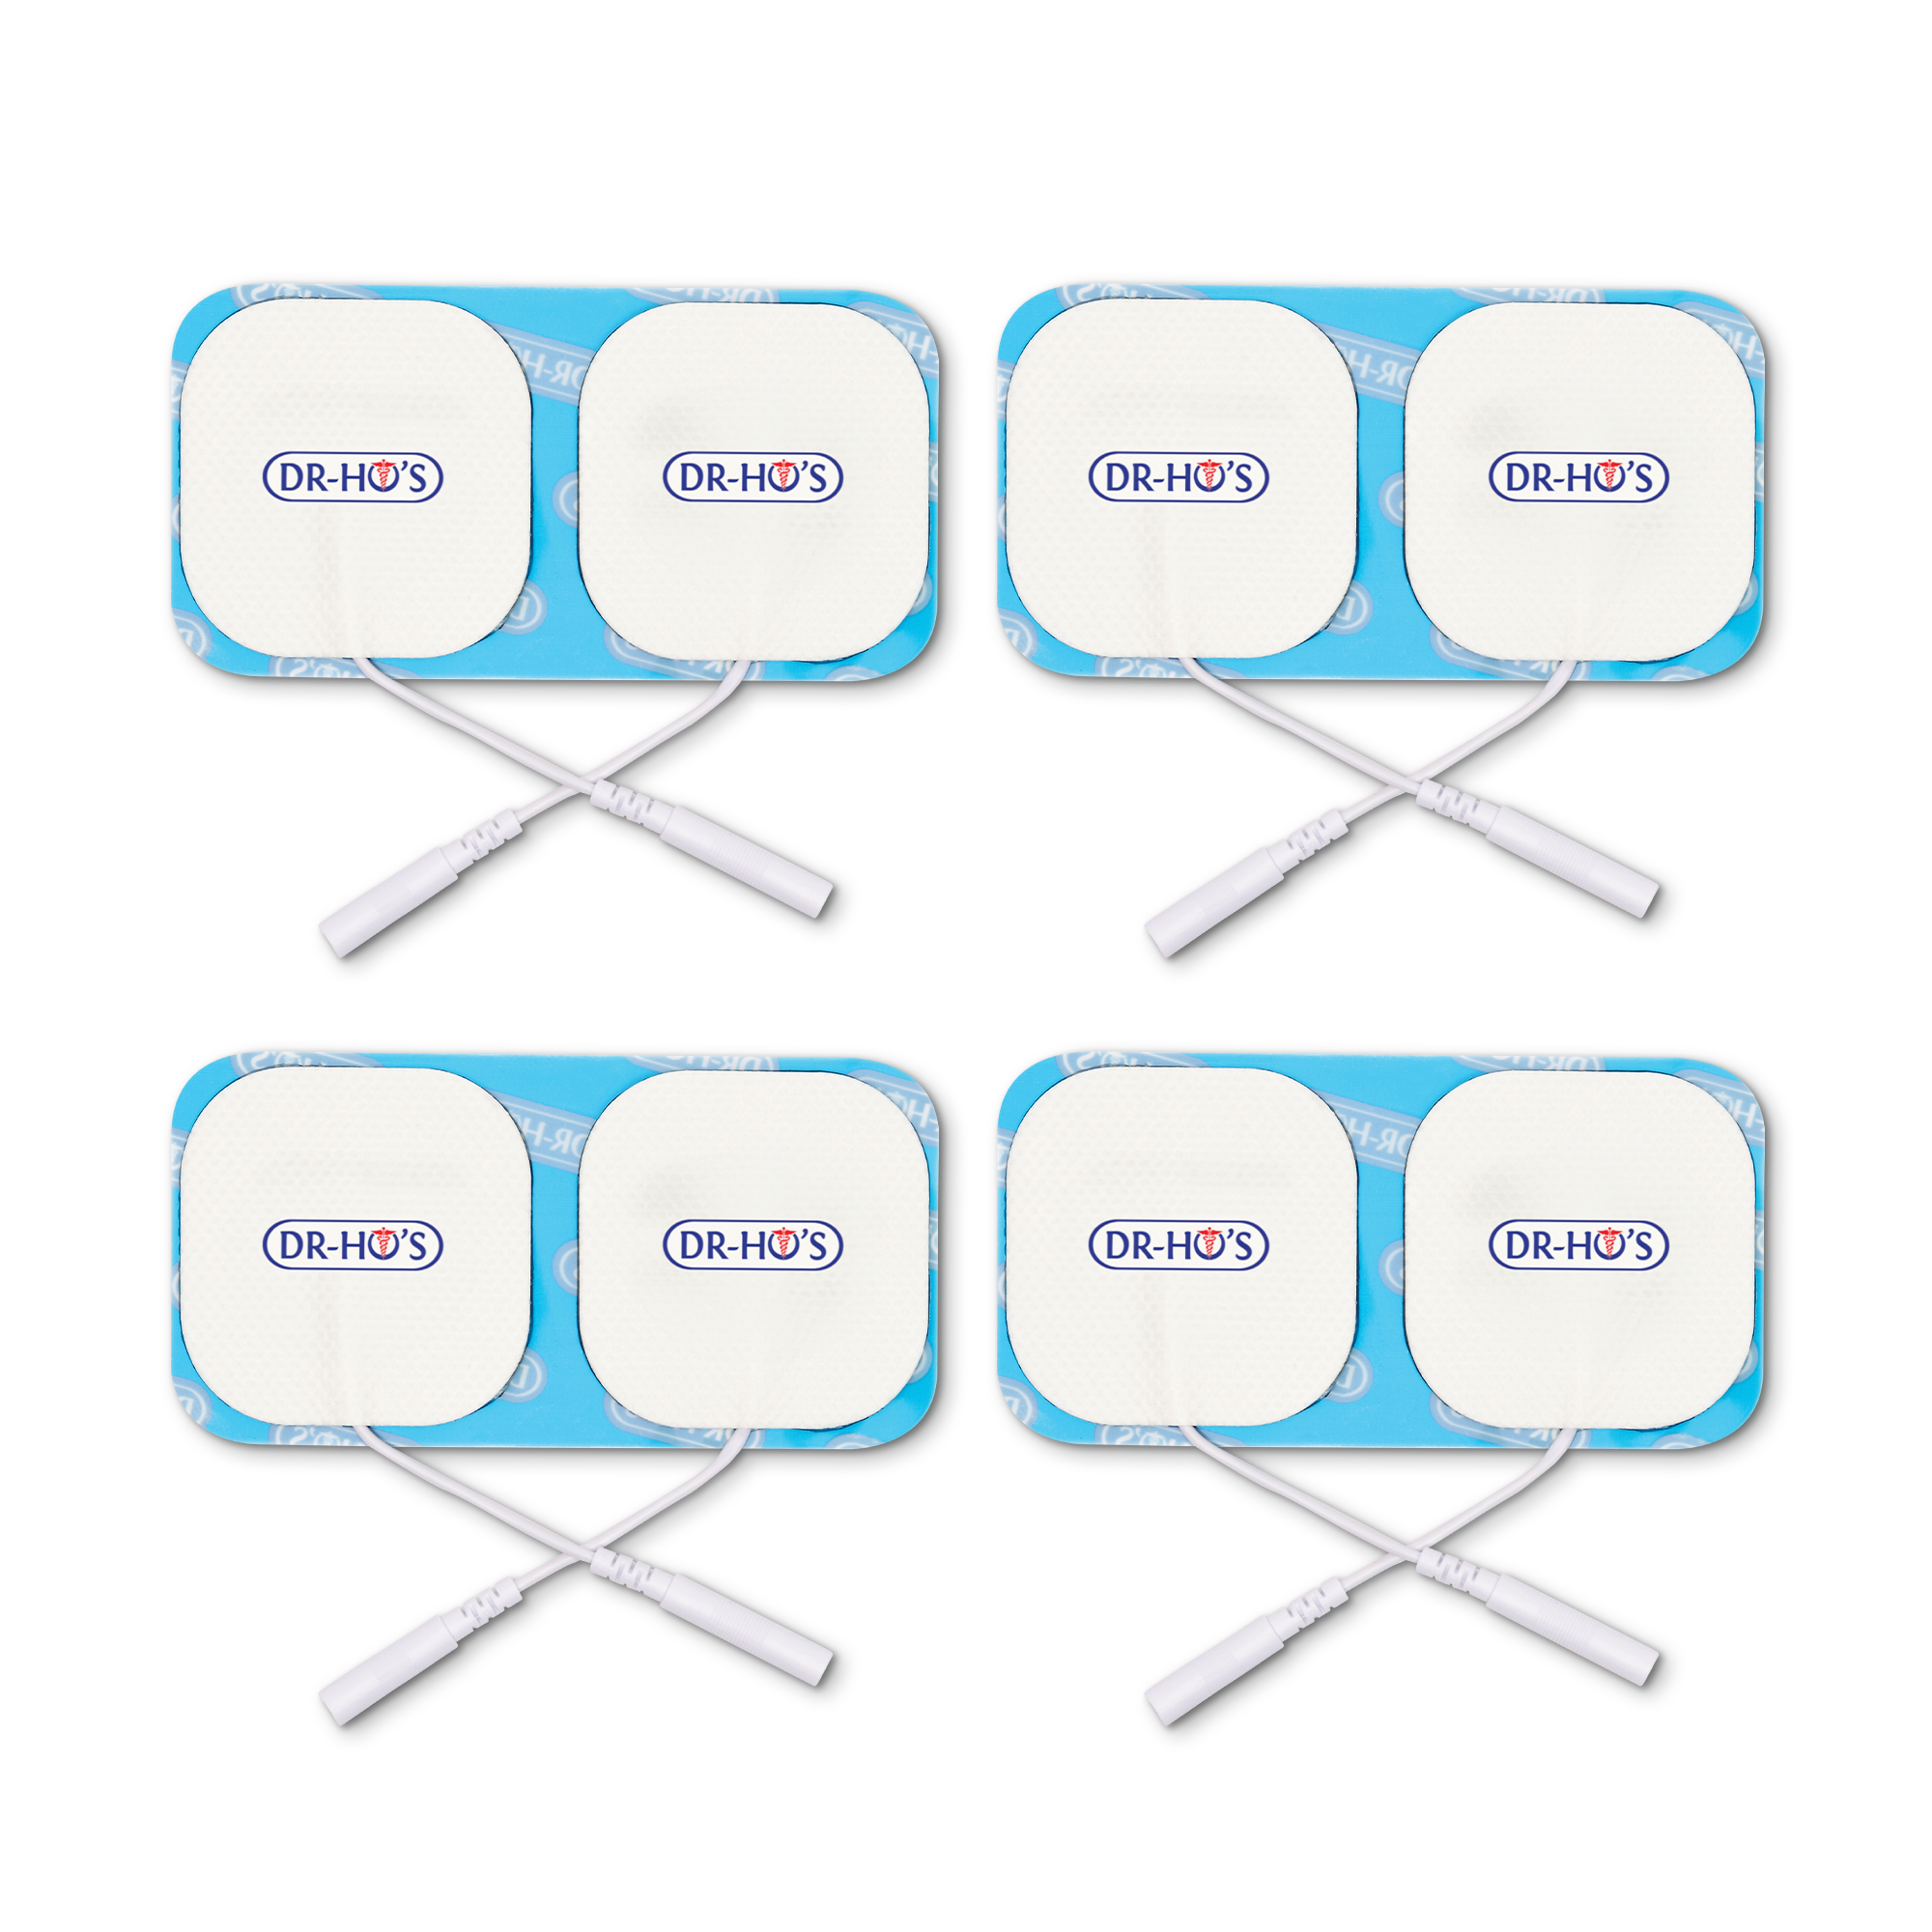 Regular Gel Pads Replacement Kit (4 Pairs) – DR-HO'S